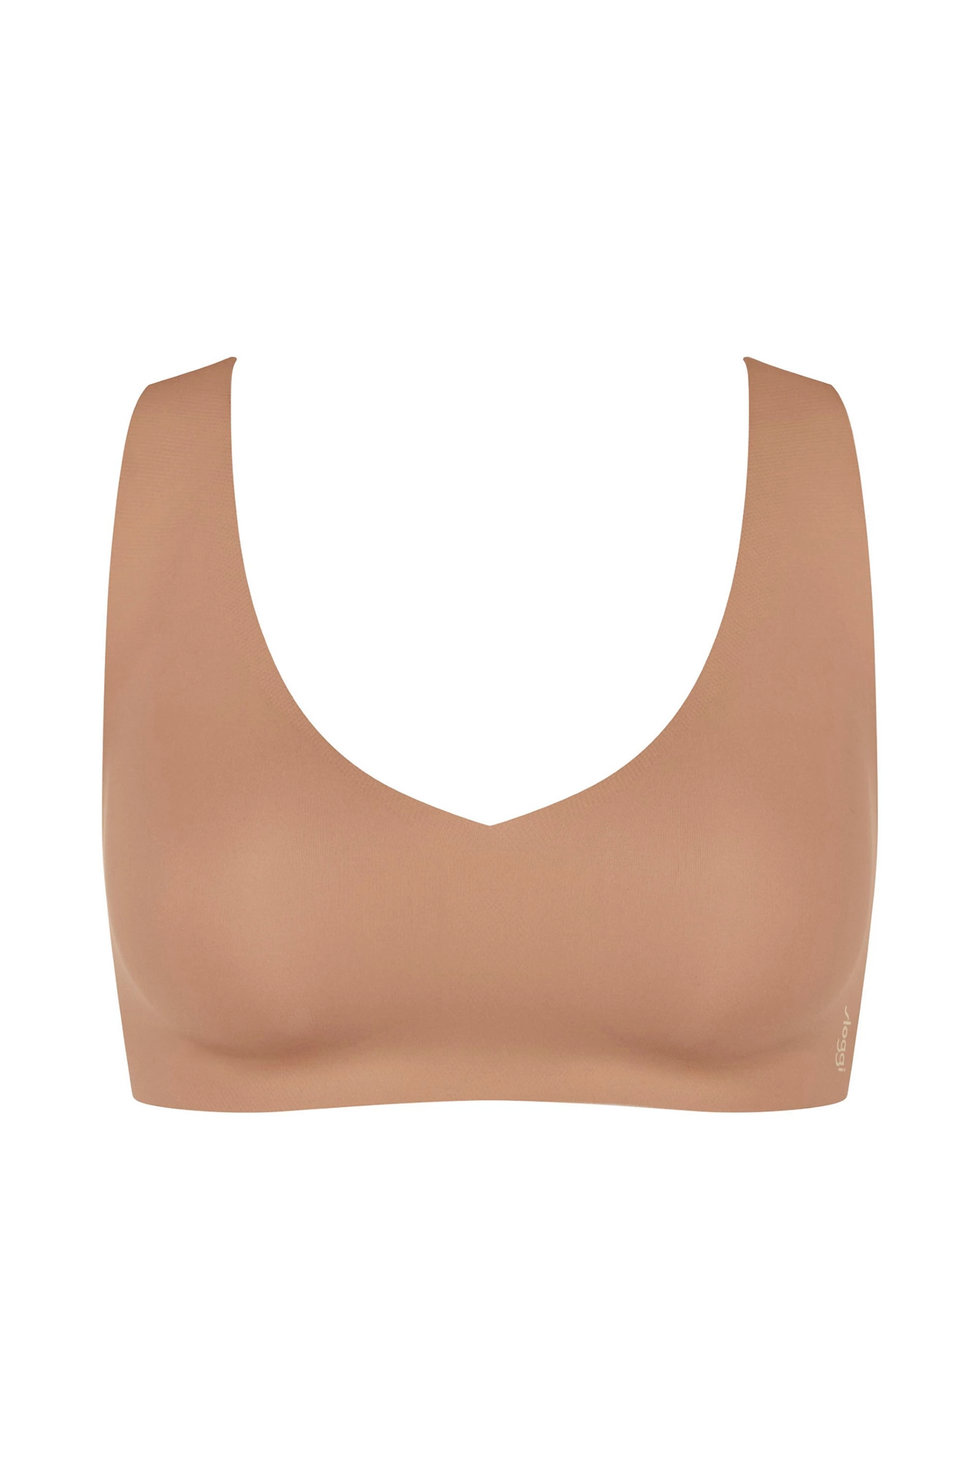 Metallic Decoration Sexy Comfortable Seamless Bra With Extended